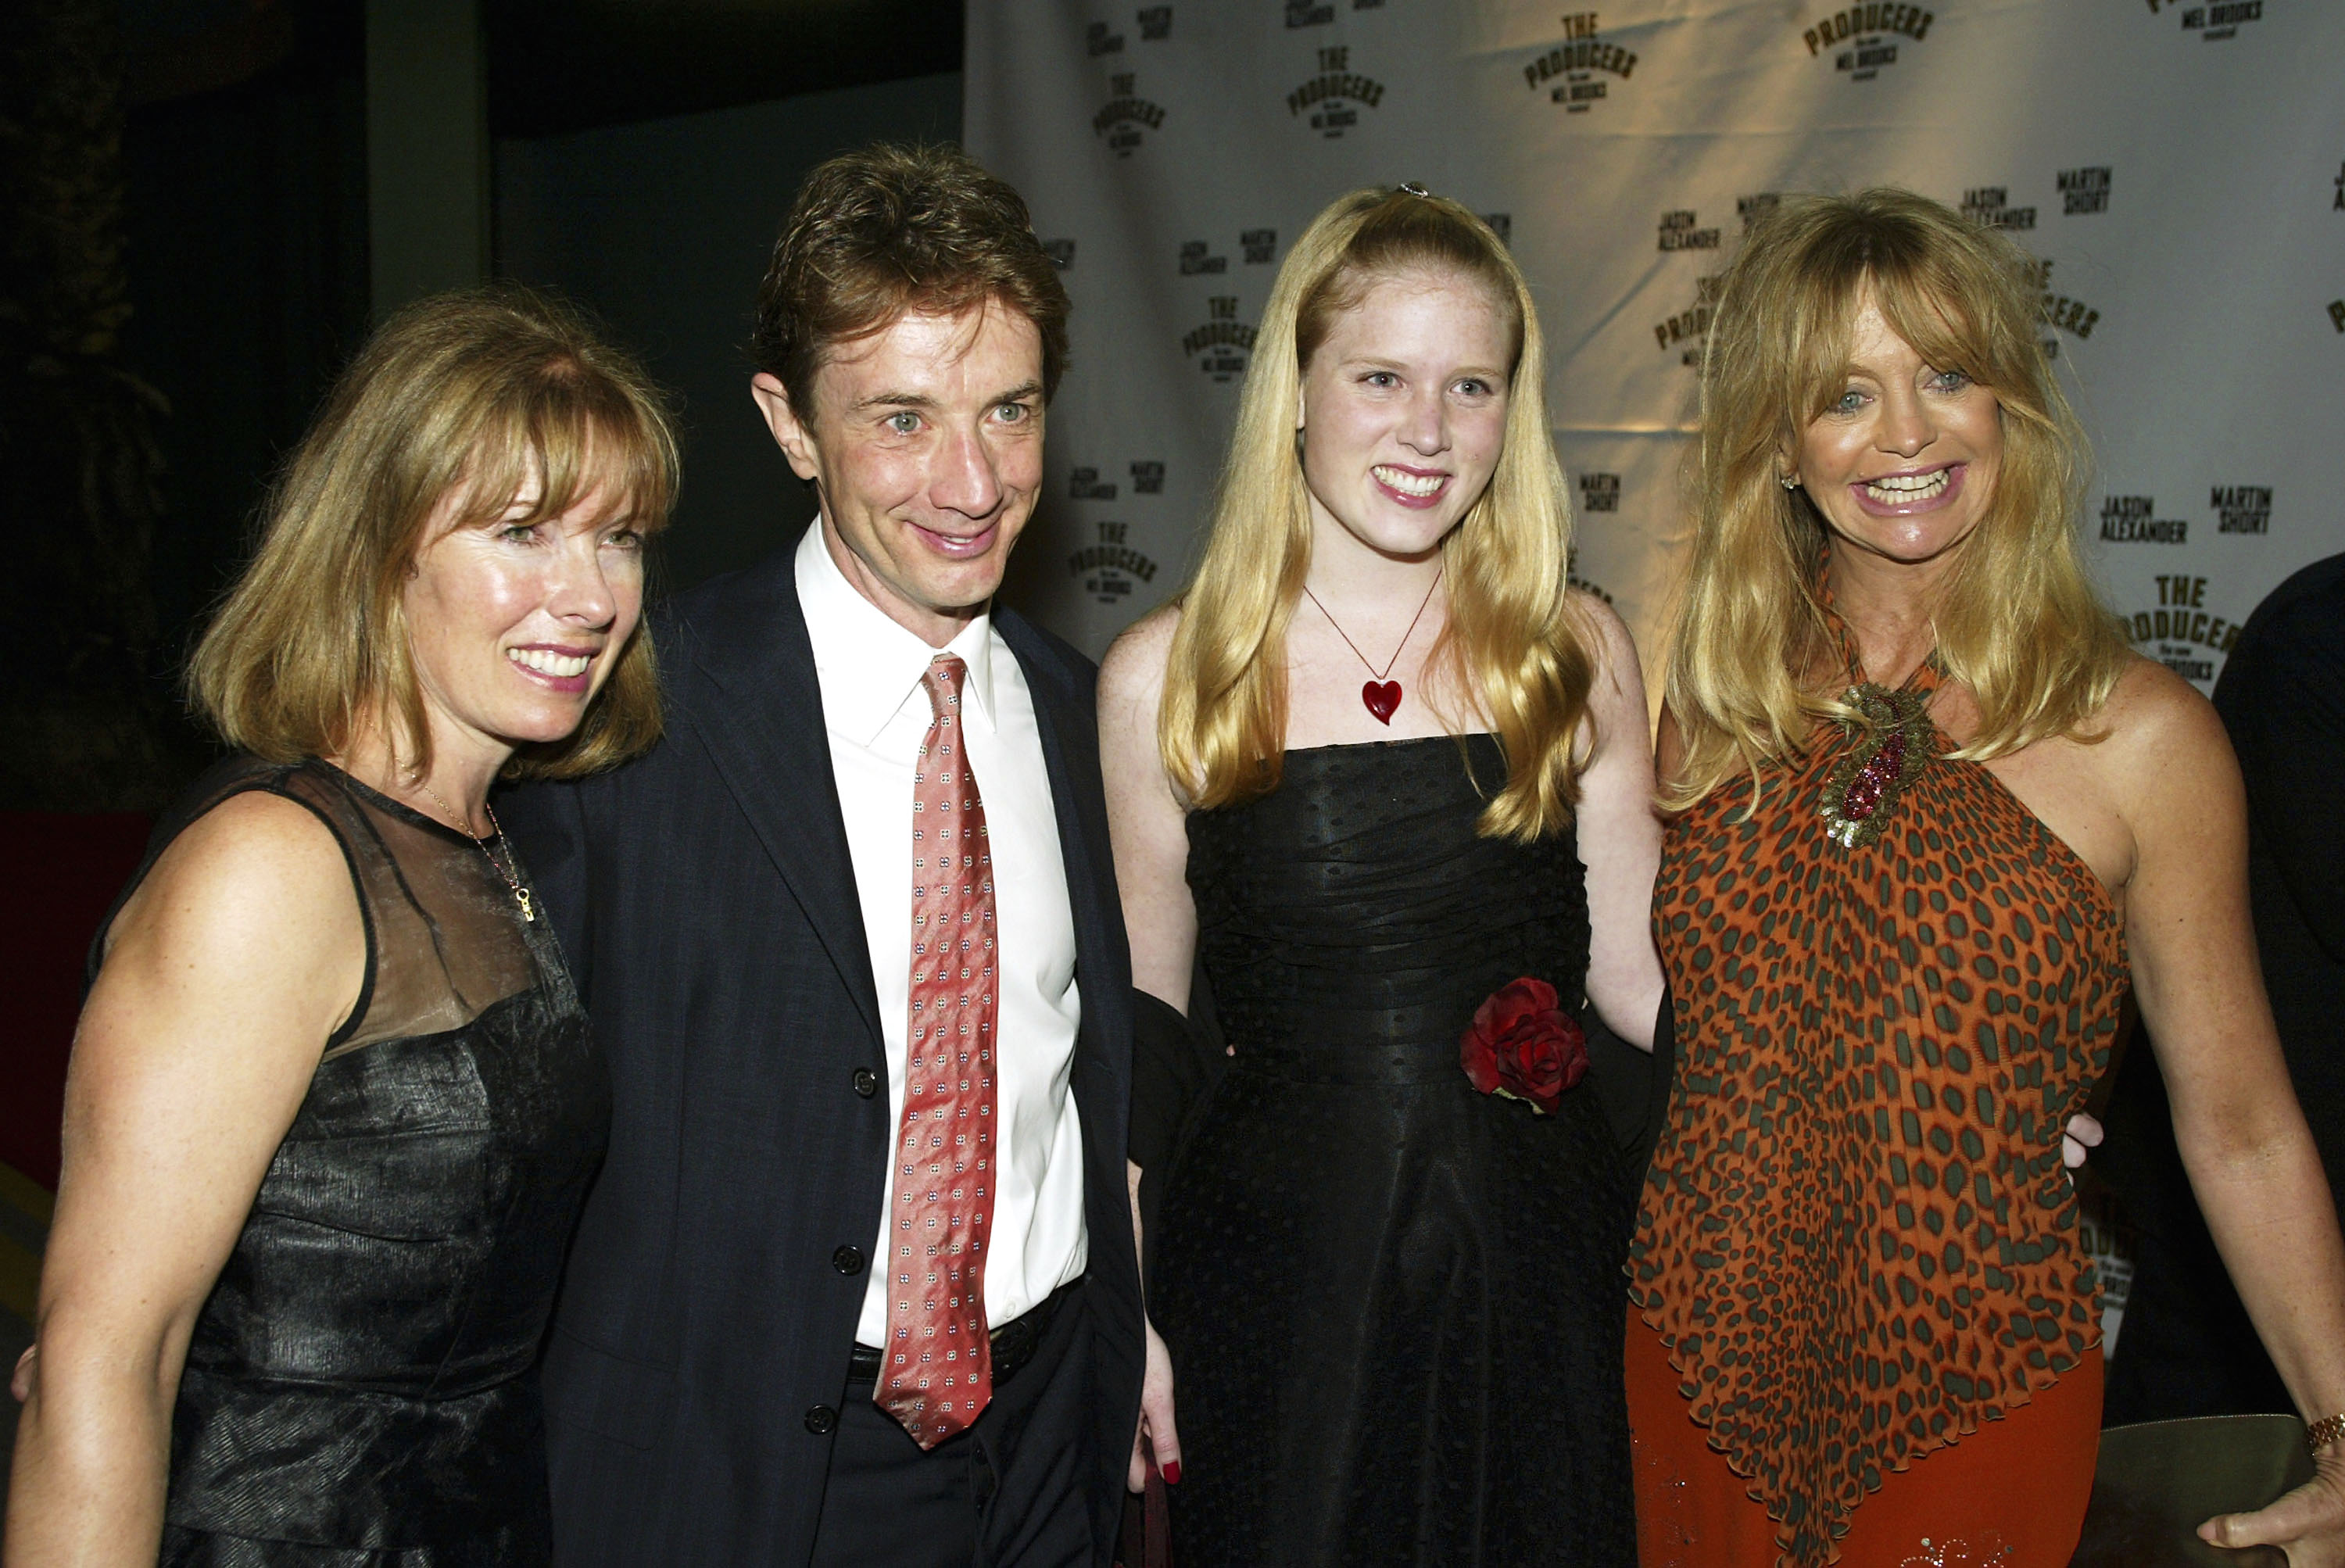 Nancy Dolman, Martin Short, Katherine Elizabeth Short, and Goldie Hawn at the after-party for "The Producers" on May 29, 2003, in Los Angeles, California. | Source: Getty Images